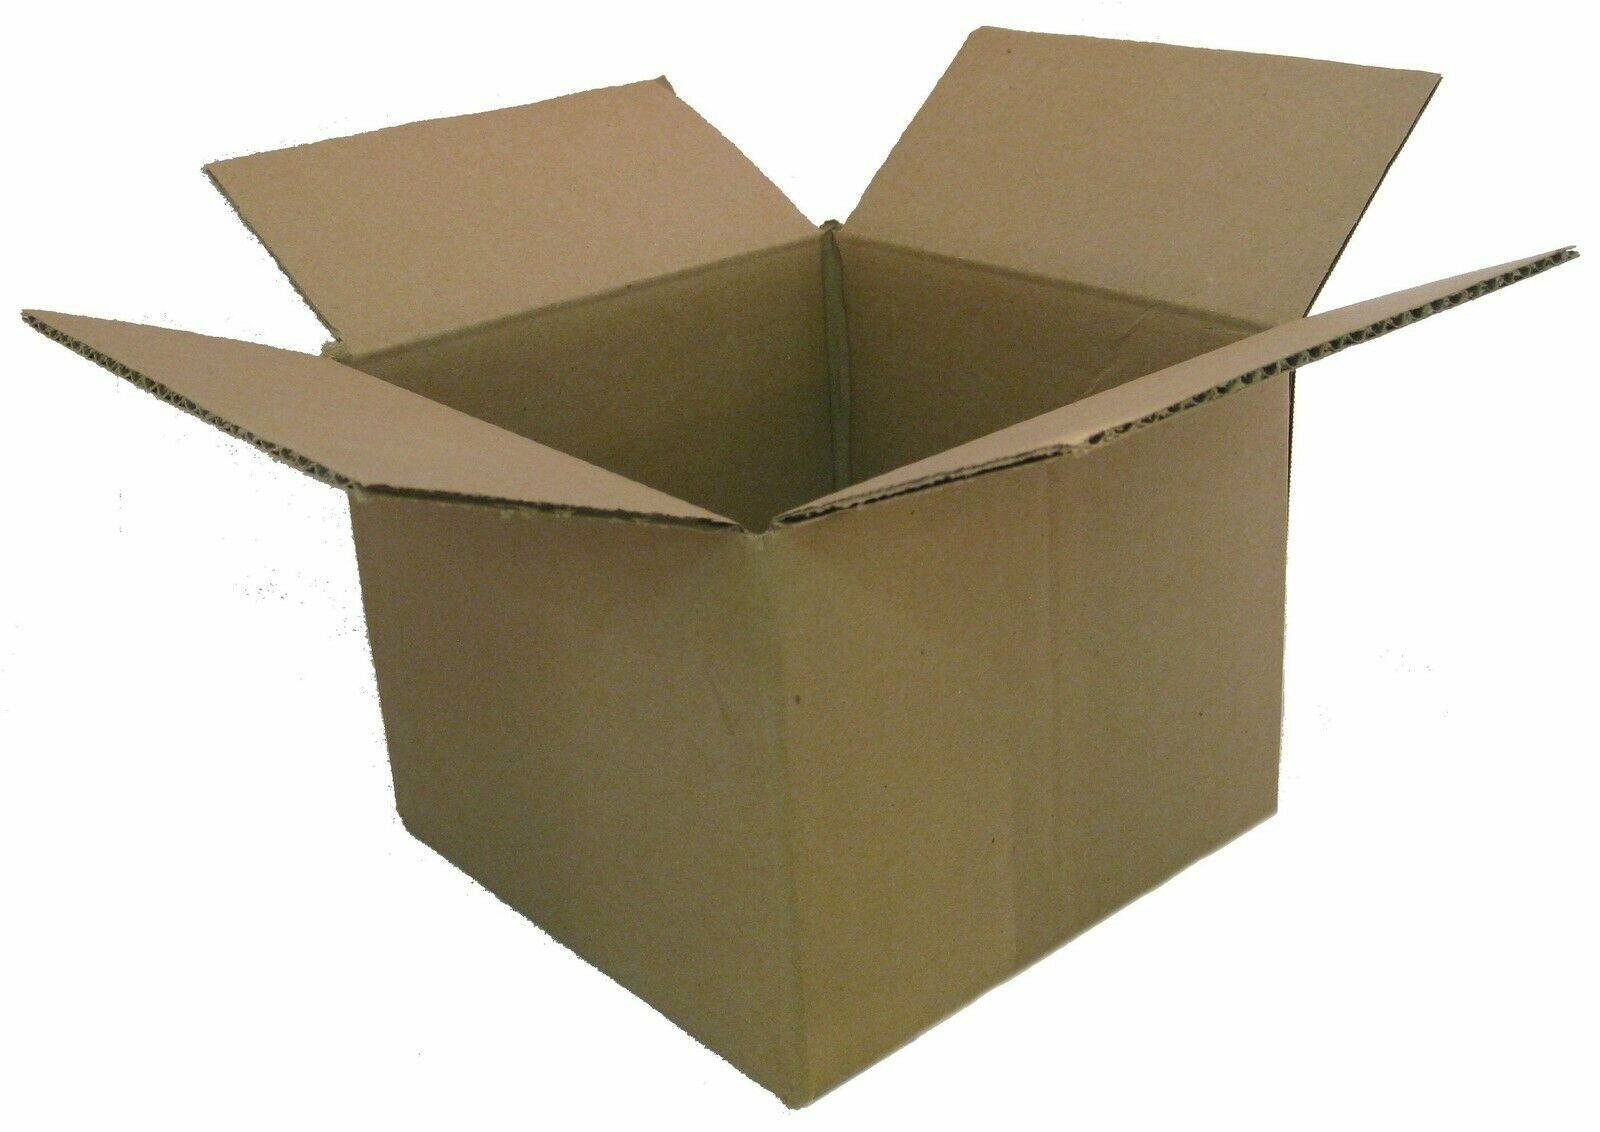 25 16x16x12 Corrugated Boxes Shipping Packing Moving Cardboard Cartons